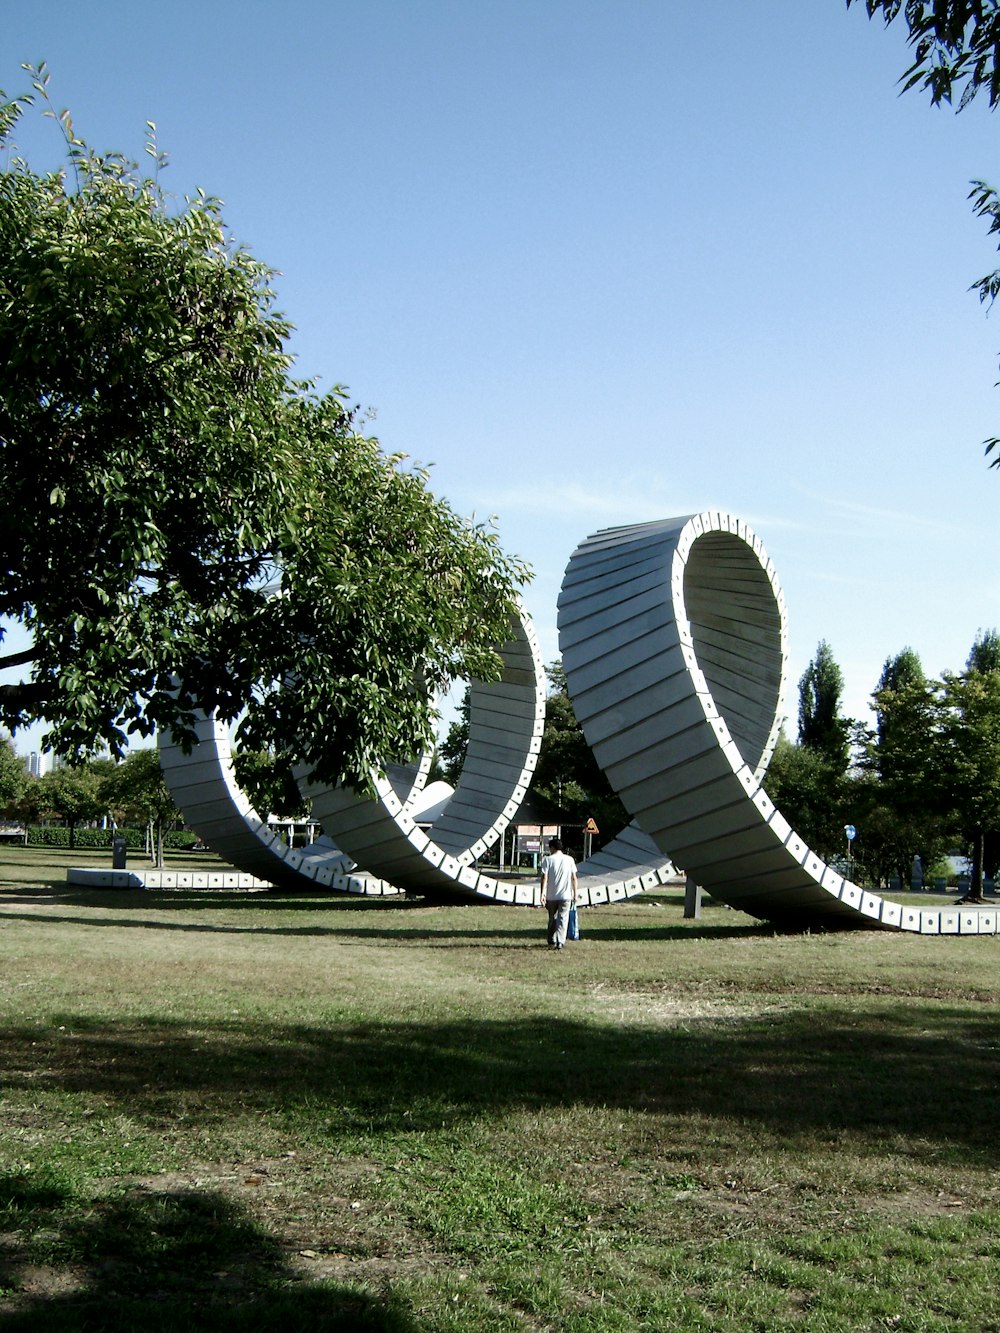 a man standing in front of a sculpture in a park